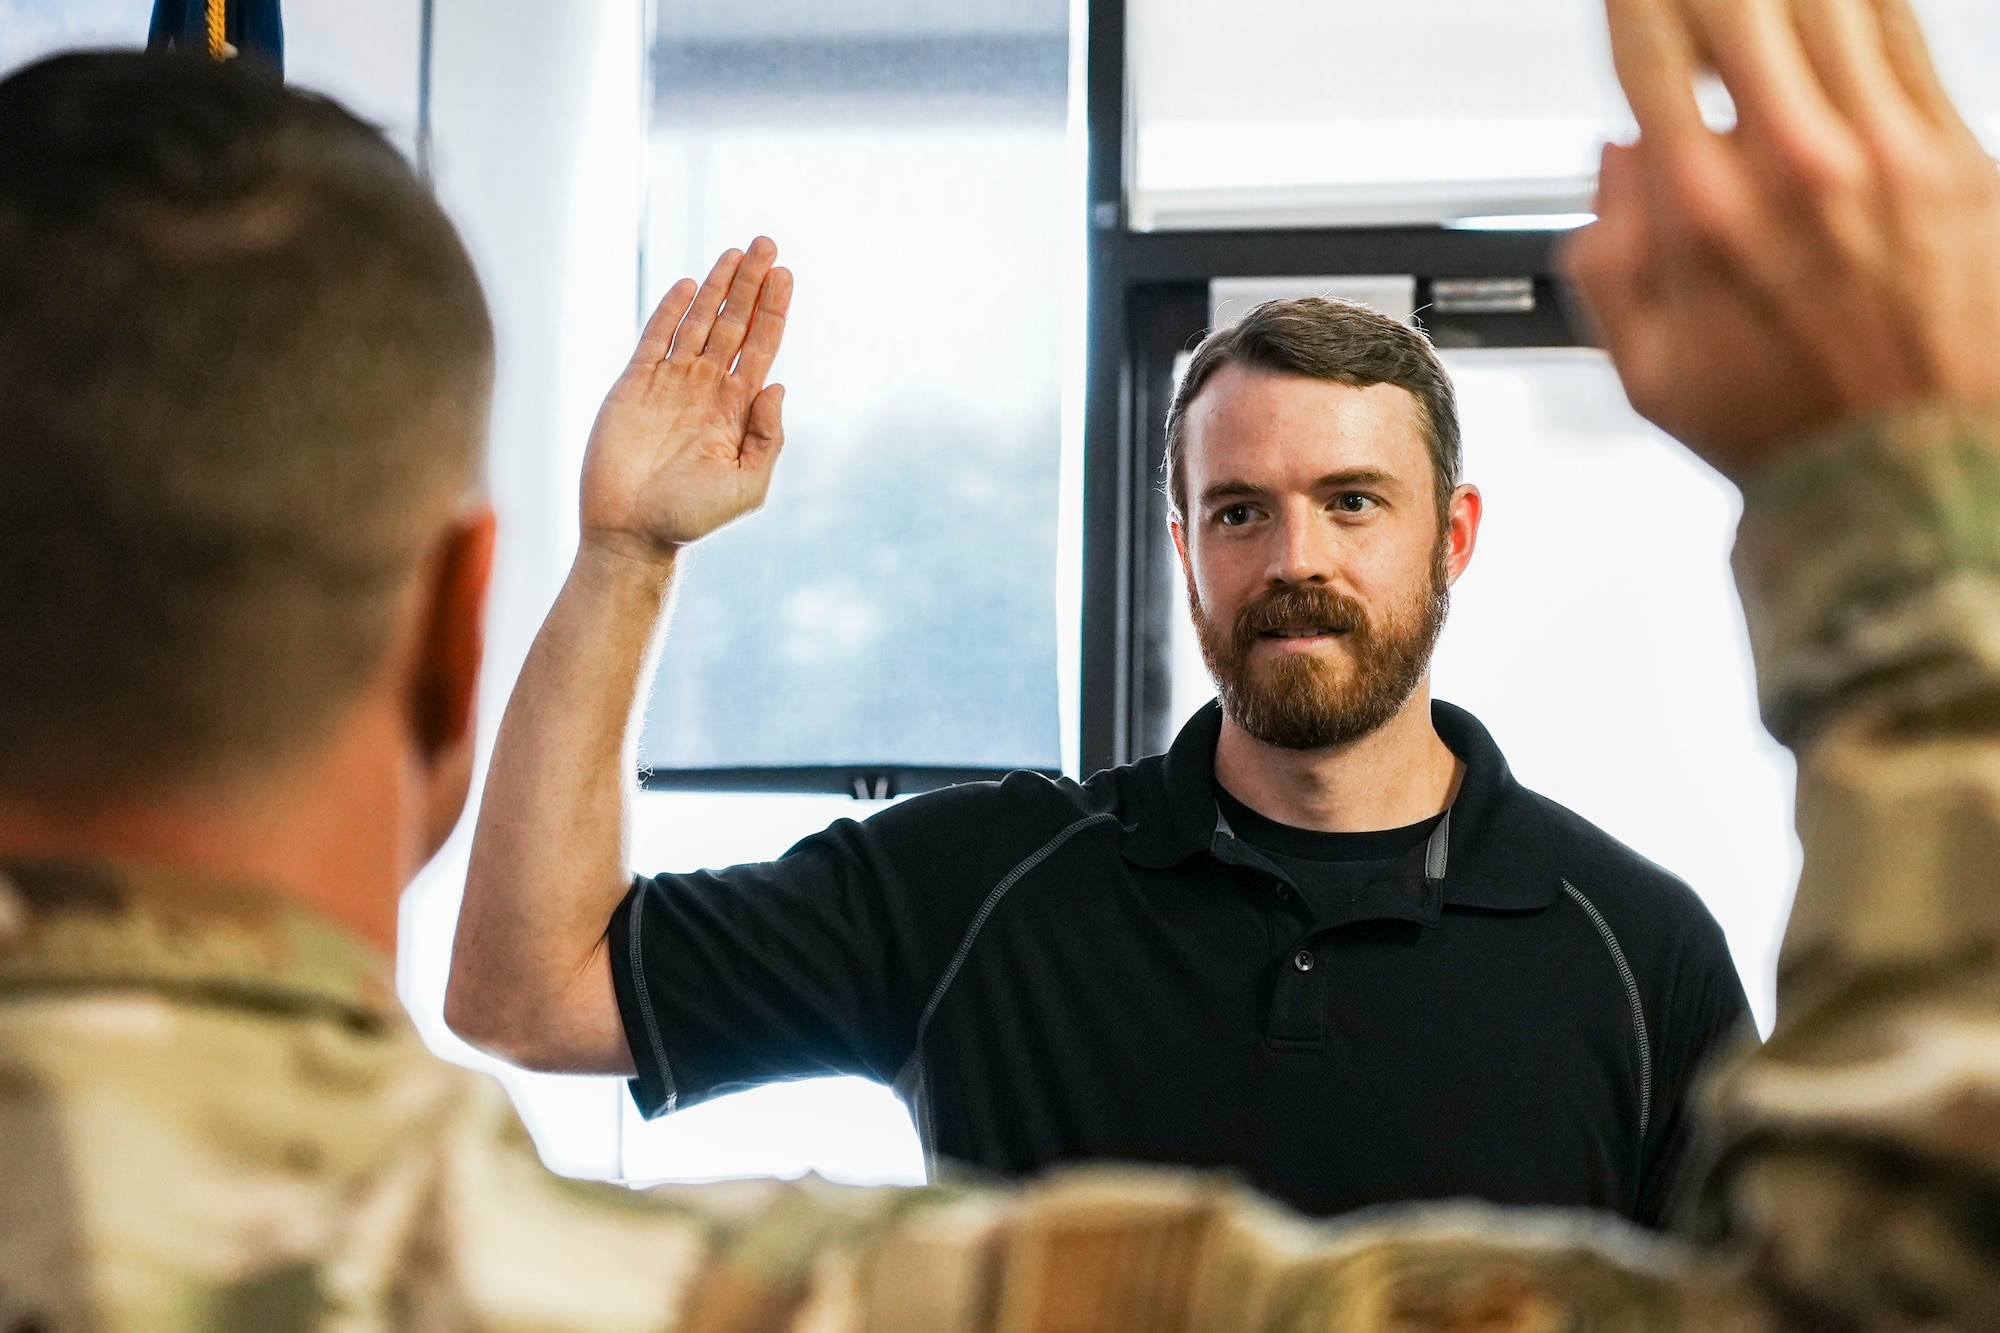 Man holds hand up to take the Oath of Enlistment.